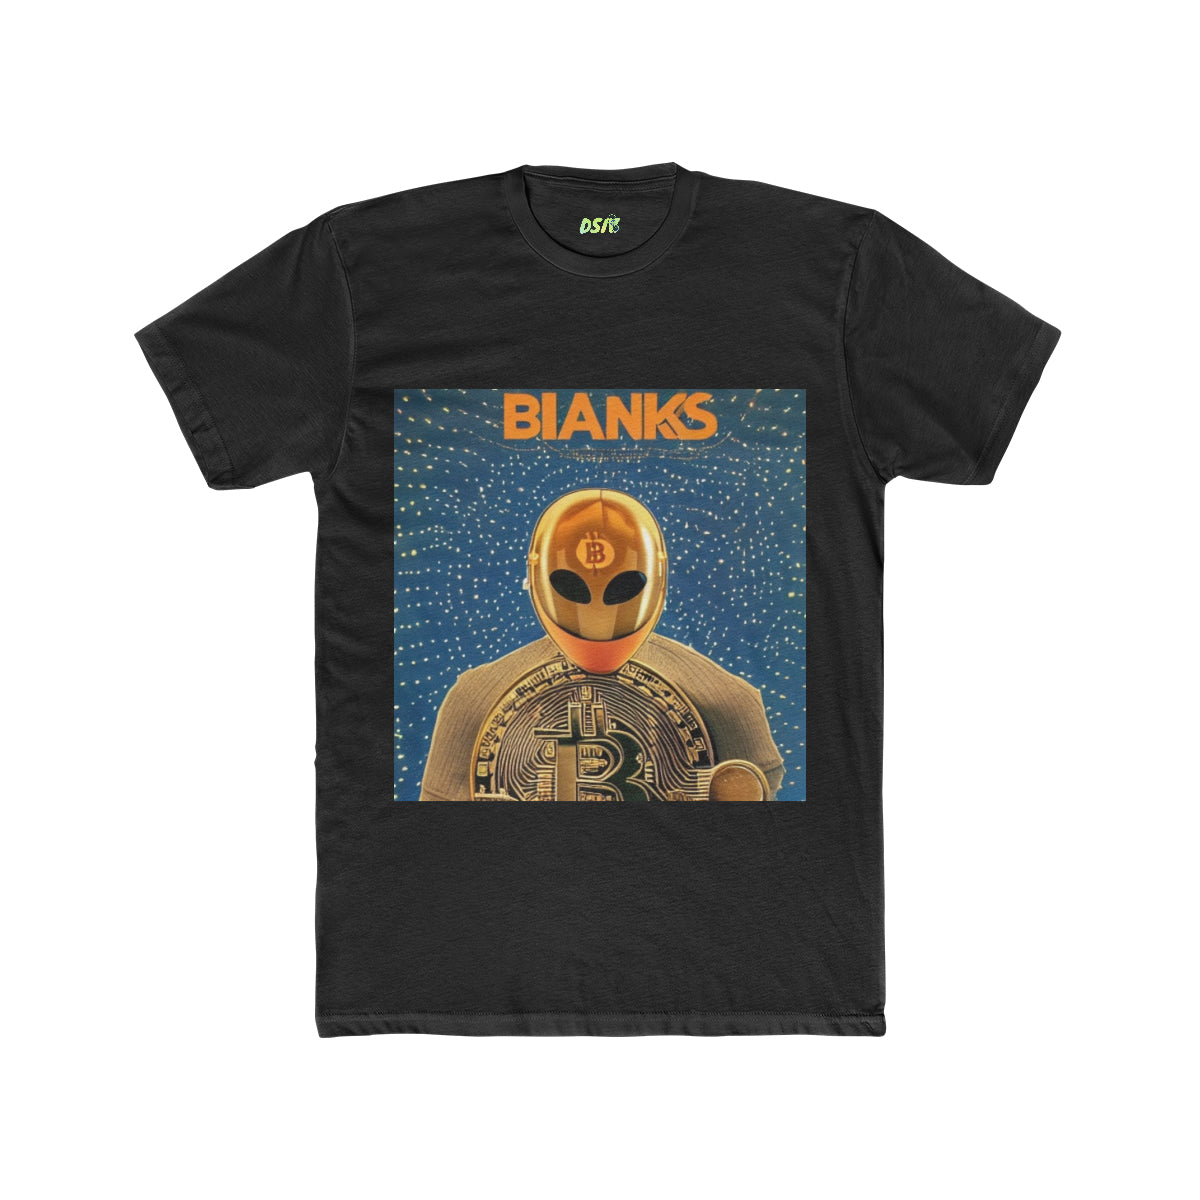 BTC BIANKS - Obey The Code T-Shirt Collection - DSIV